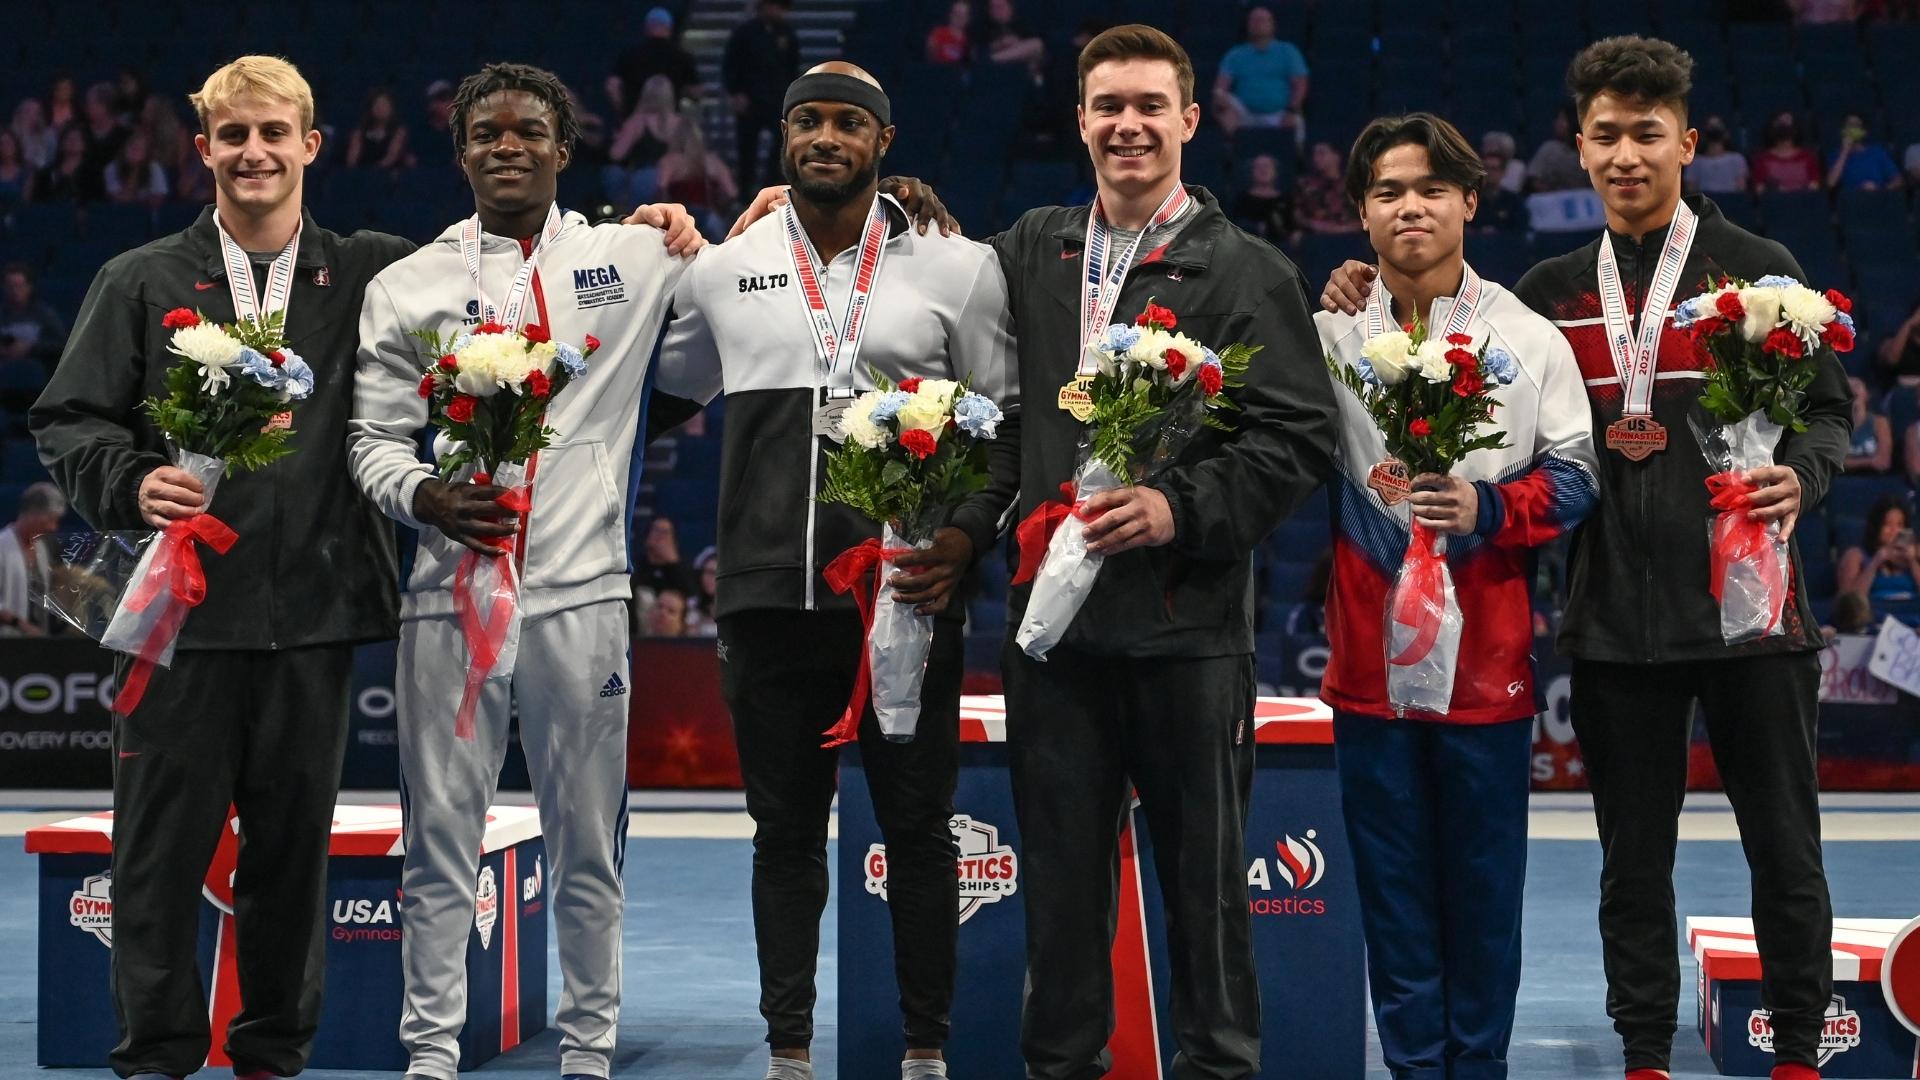 2022 OOFOS U.S. Gymnastics Championships: Brody Malone goes back-to-back, Donnell Whittenburg earns world team spot